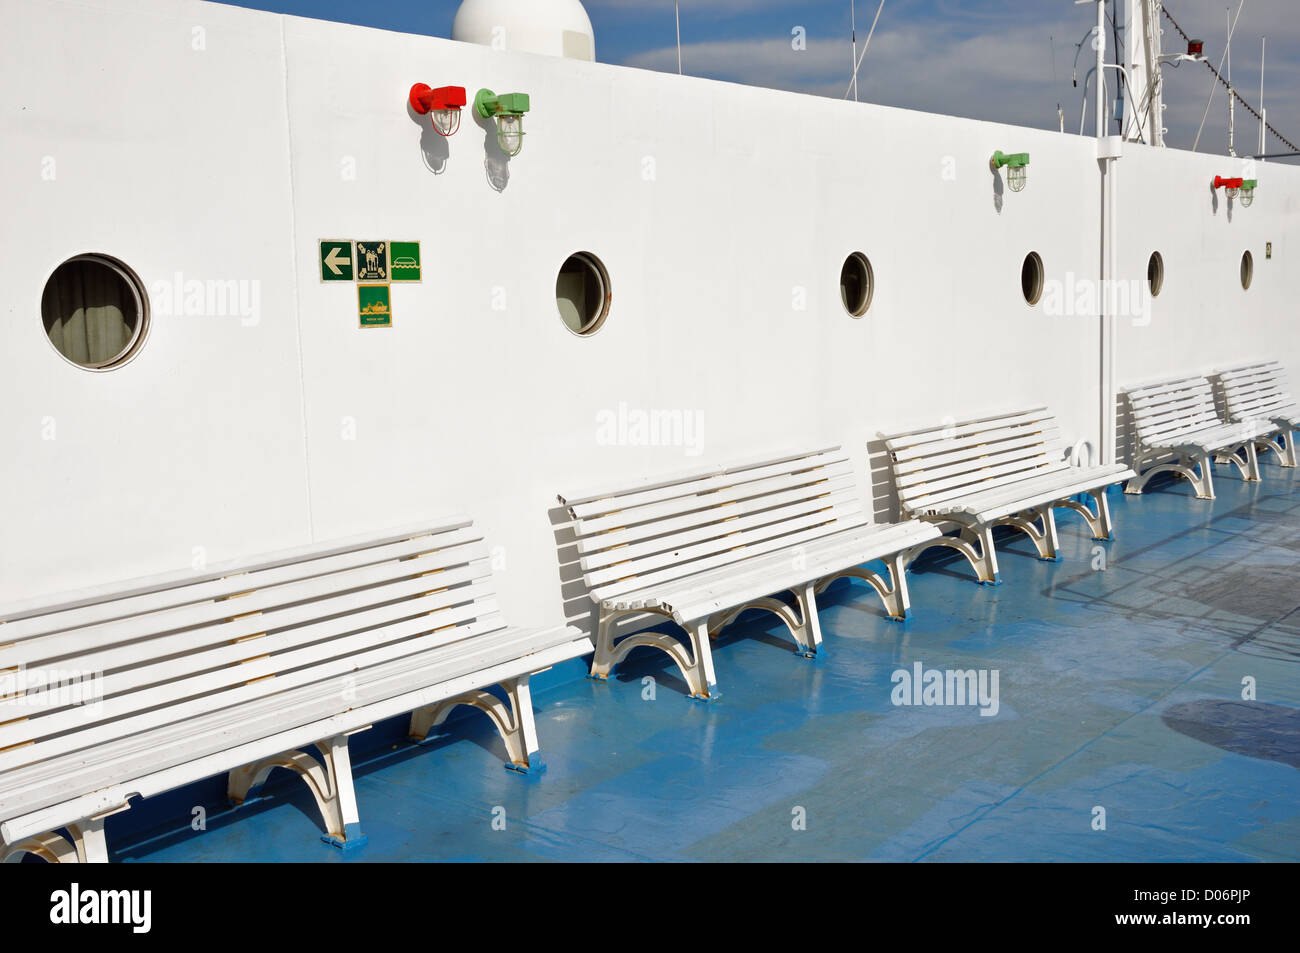 Row of benches and portholes on ship deck painted with white and blue colors. Stock Photo